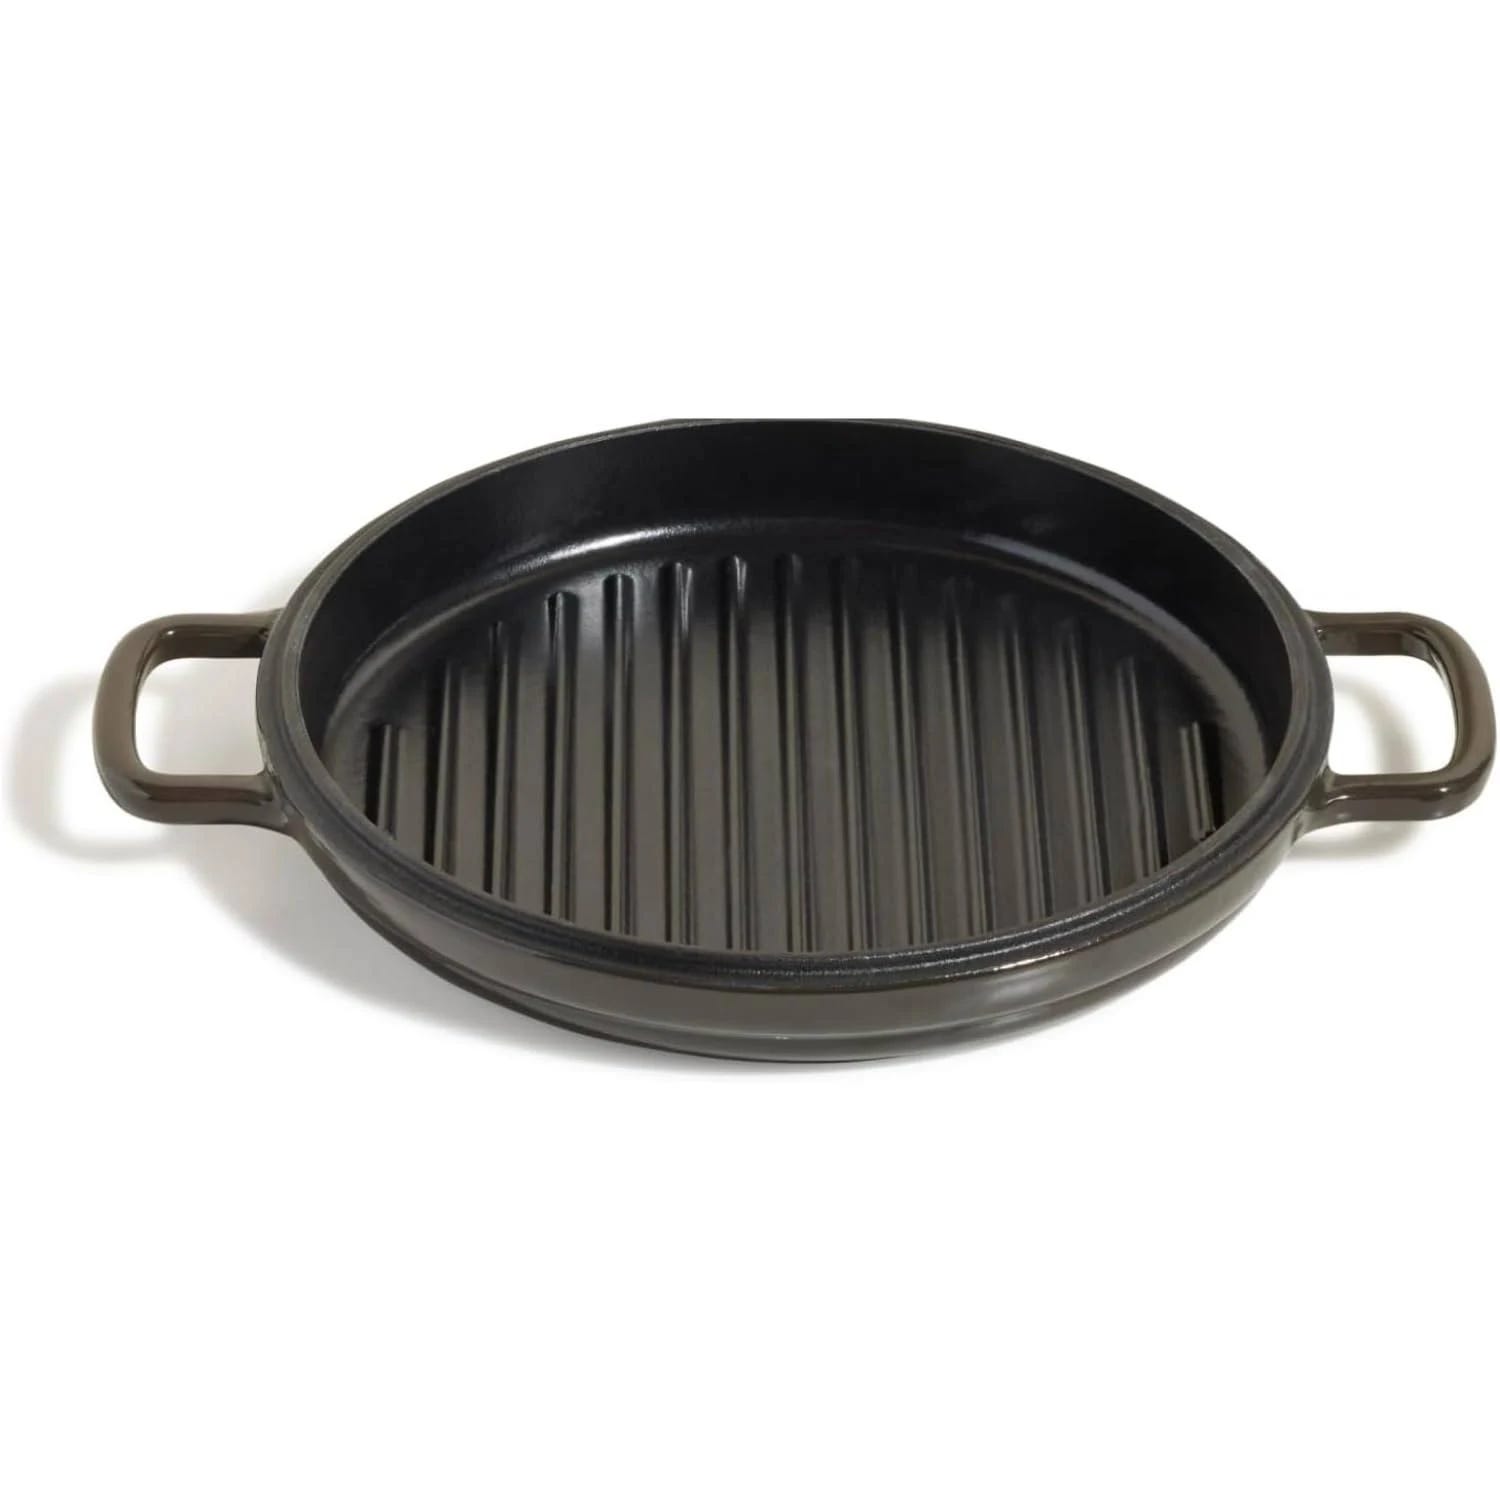 Our Place Cast Iron Hot Grill: Versatile, Non-Toxic 10.5